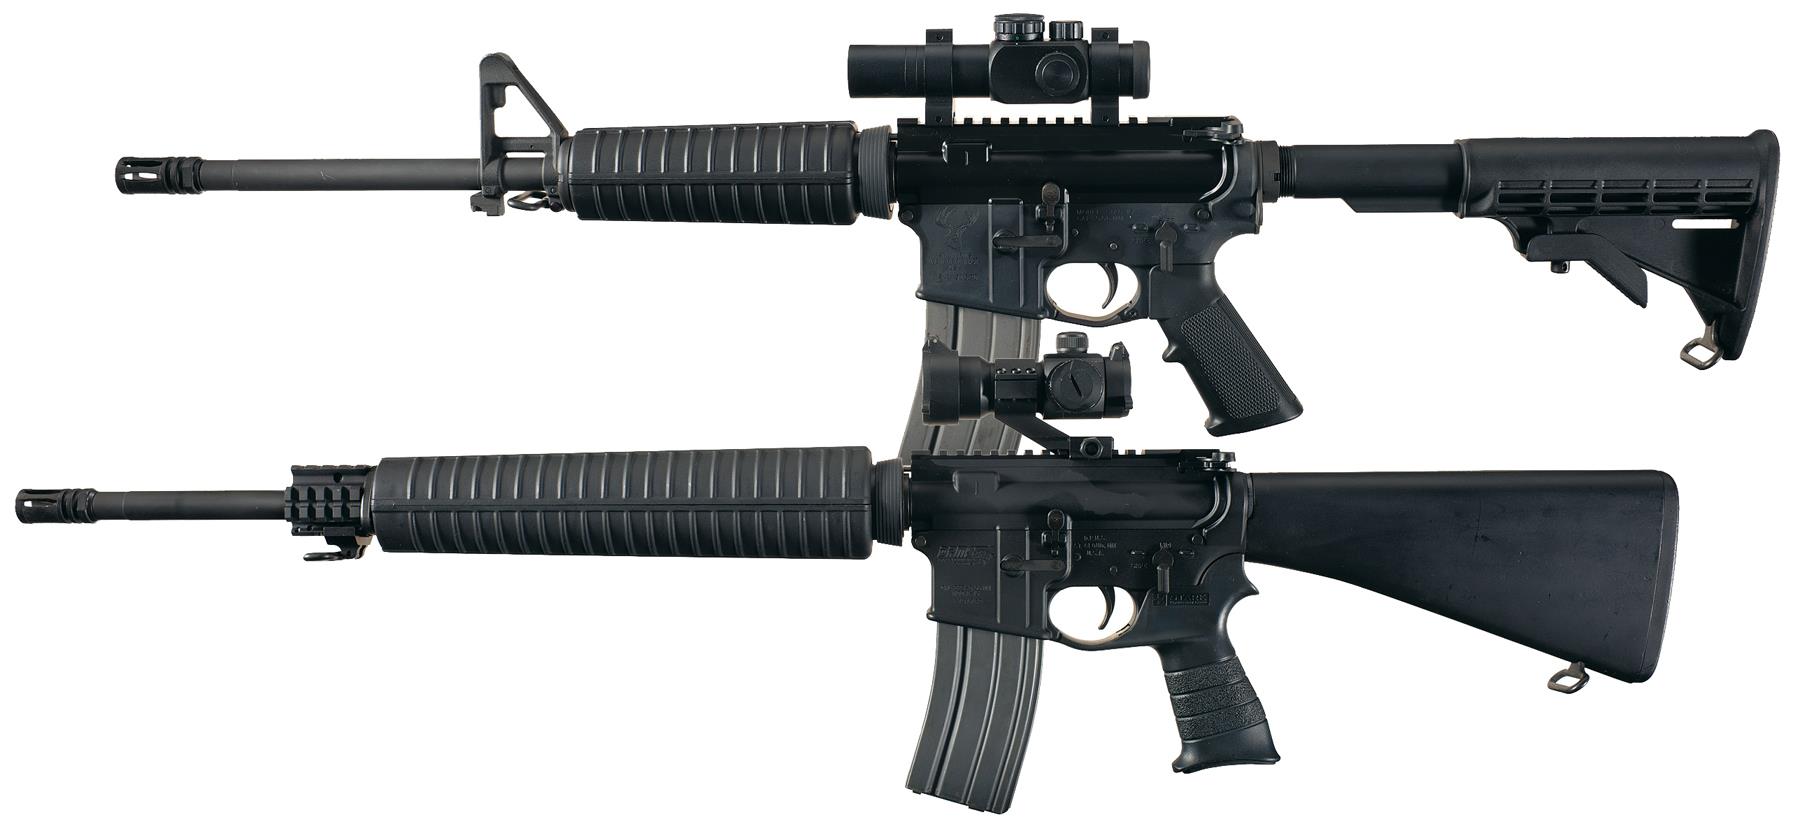 Two AR-15 Style Rifles | Rock Island Auction